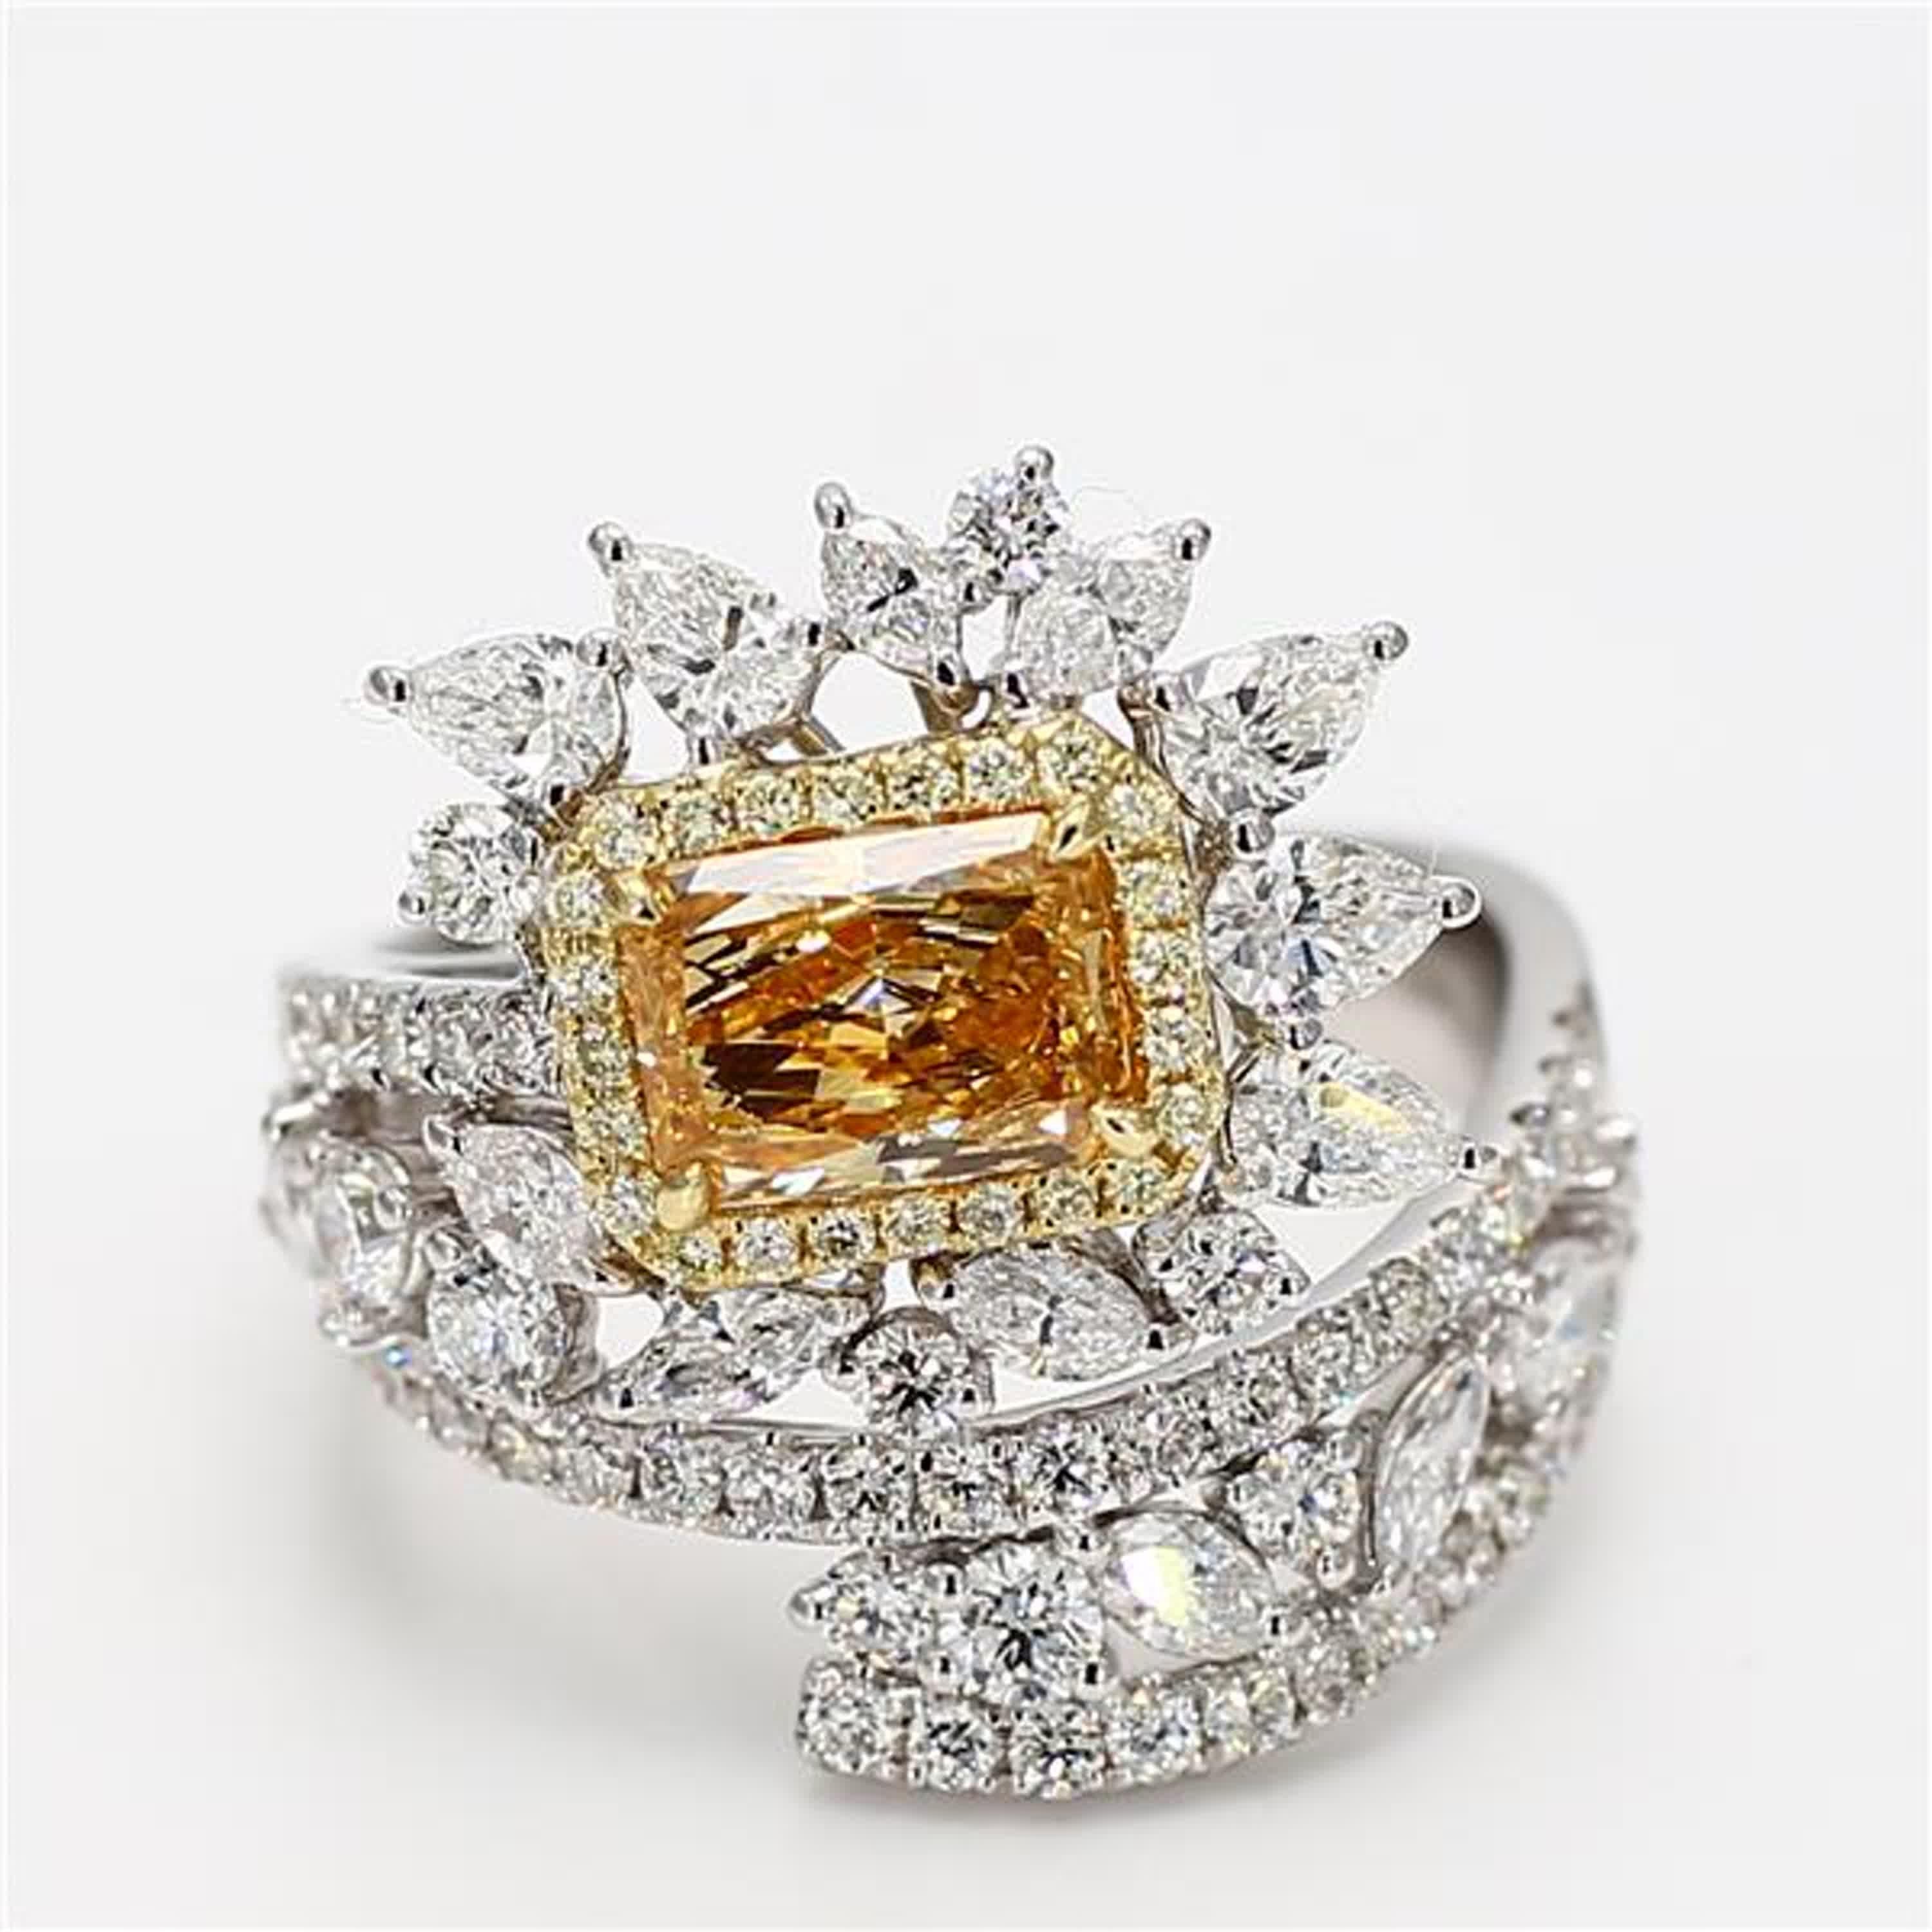 RareGemWorld's classic GIA certified diamond ring. Mounted in a beautiful 18K Yellow and White Gold and Platinum setting with a natural radiant cut yellow diamond. The yellow diamond is surrounded by natural marquise cut white diamonds, natural